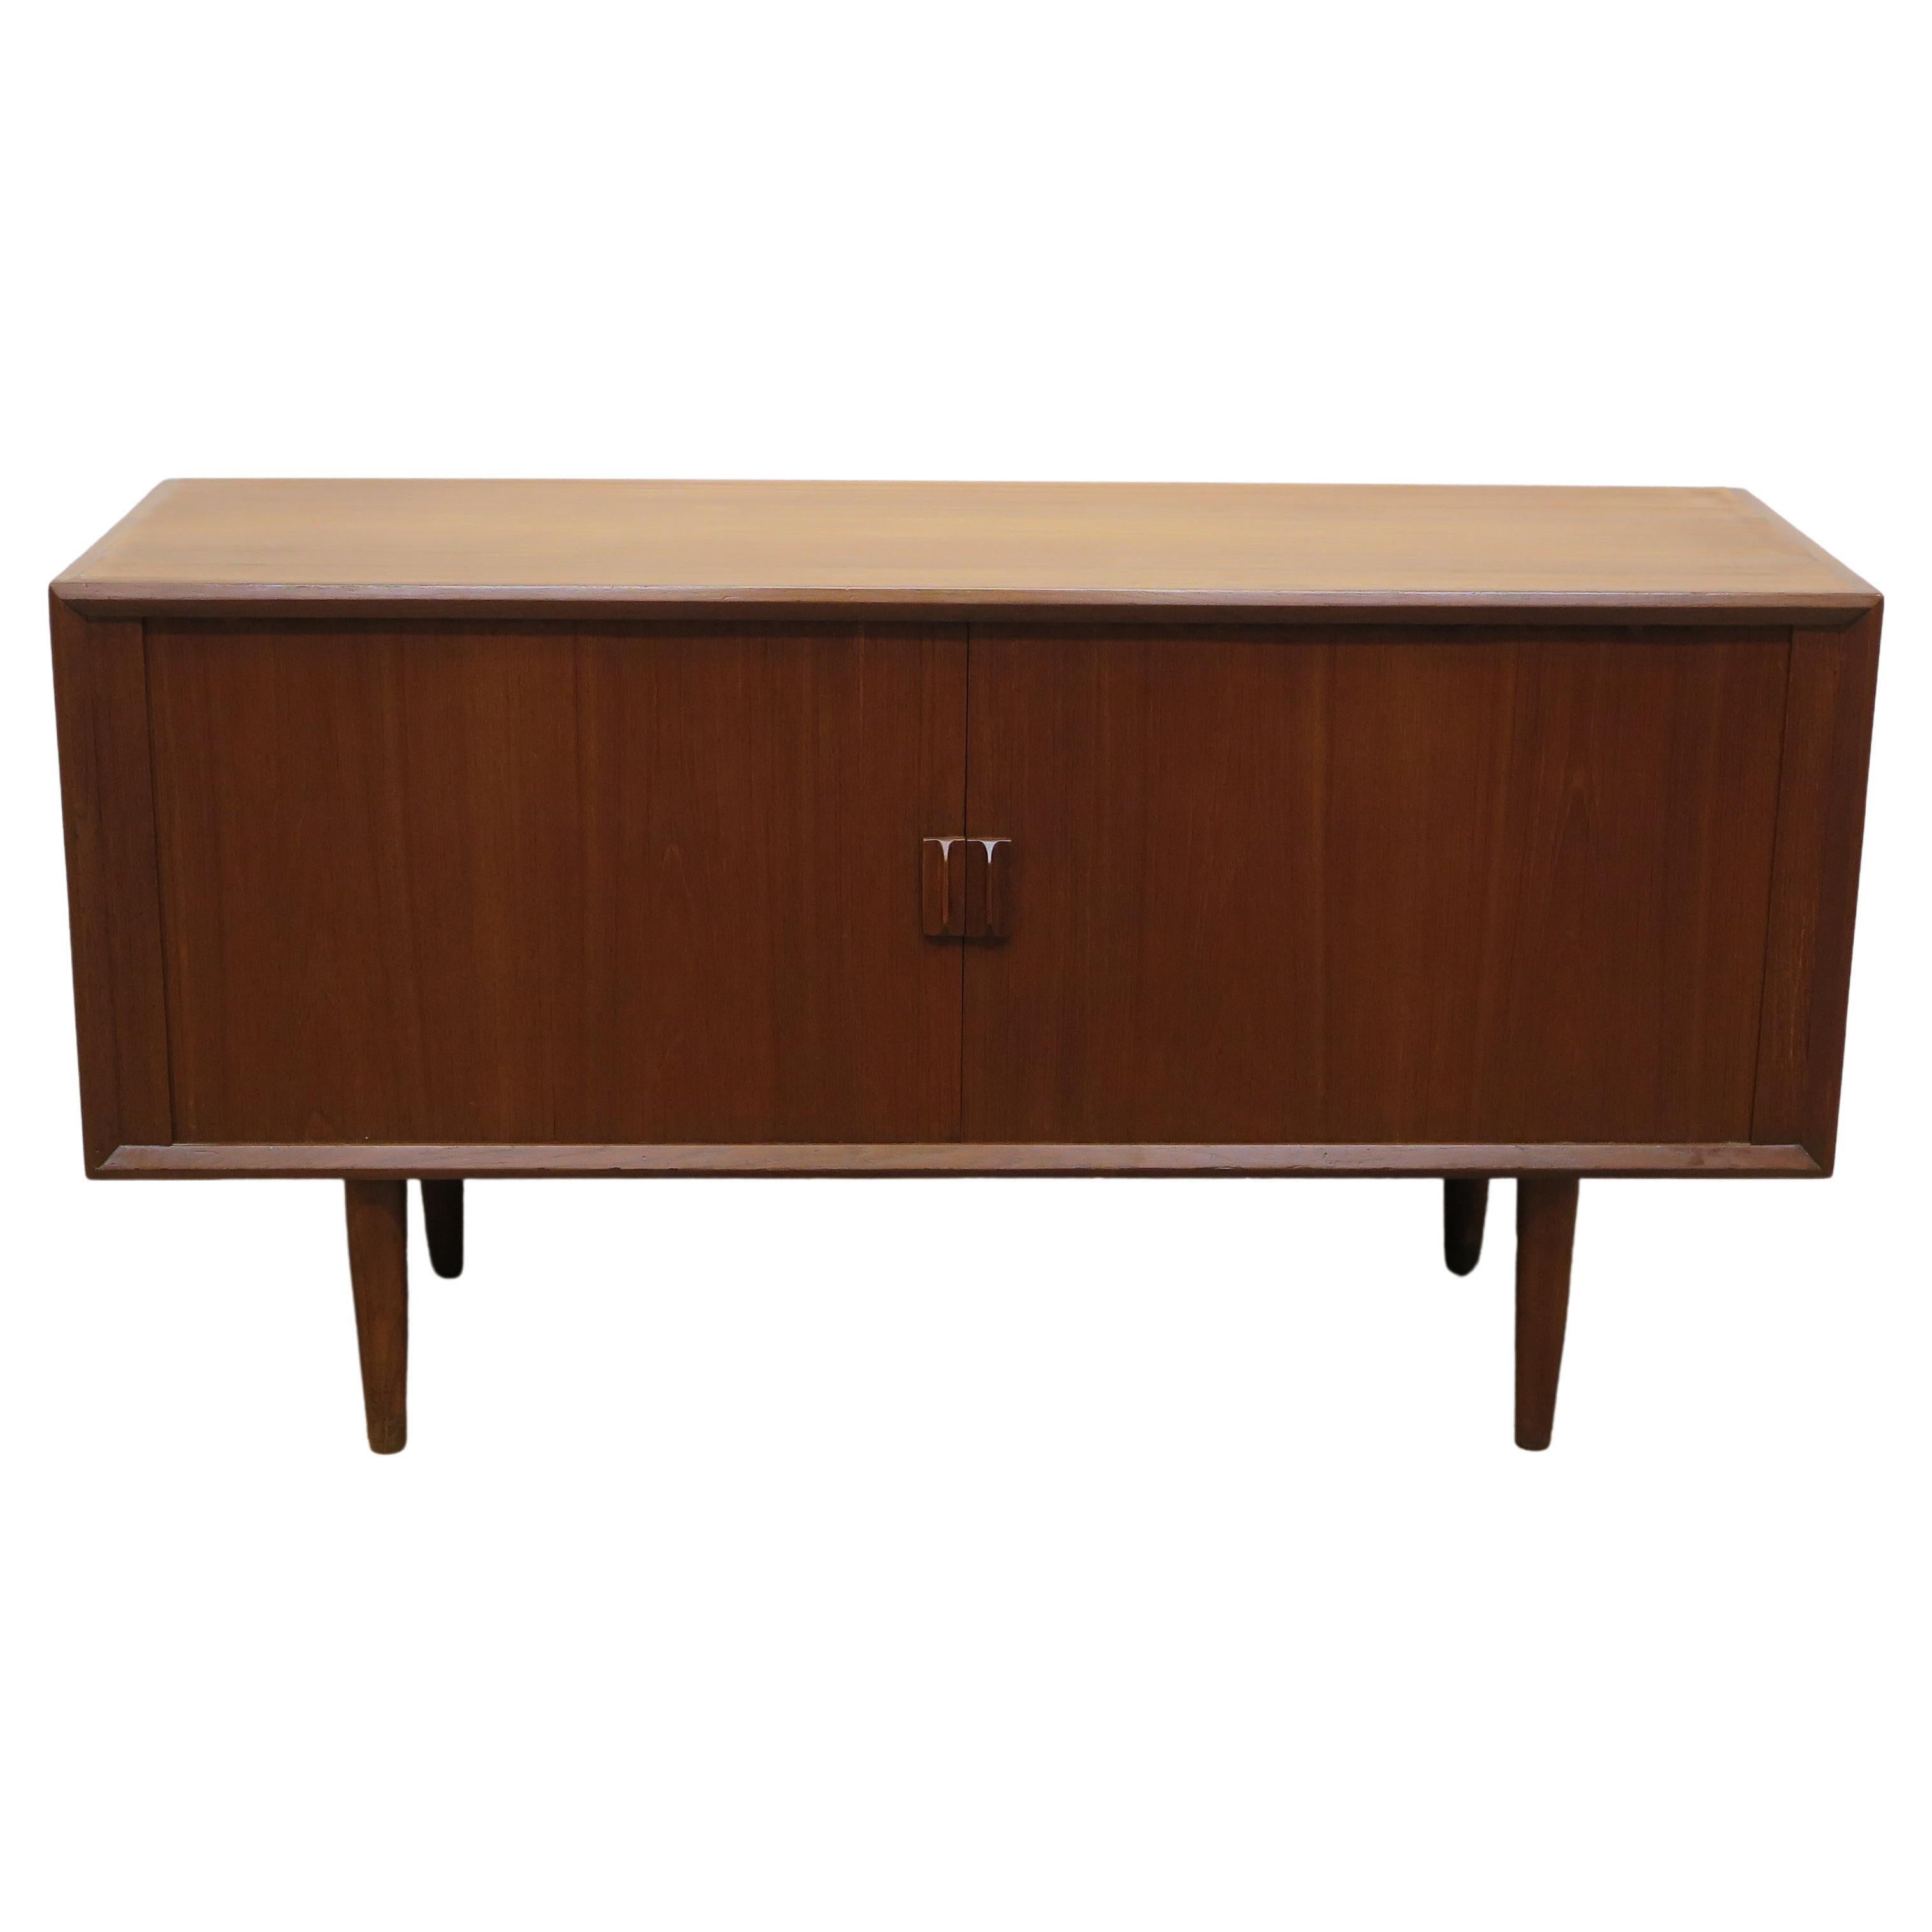  Svend Aage Larsen Credenza Sideboard.  Iconic Mid century Modern Teak Credenza Sideboard complete with original top Display case.  This is a complete unit in very good condition, all original including glass doors.  One of the most iconic mid